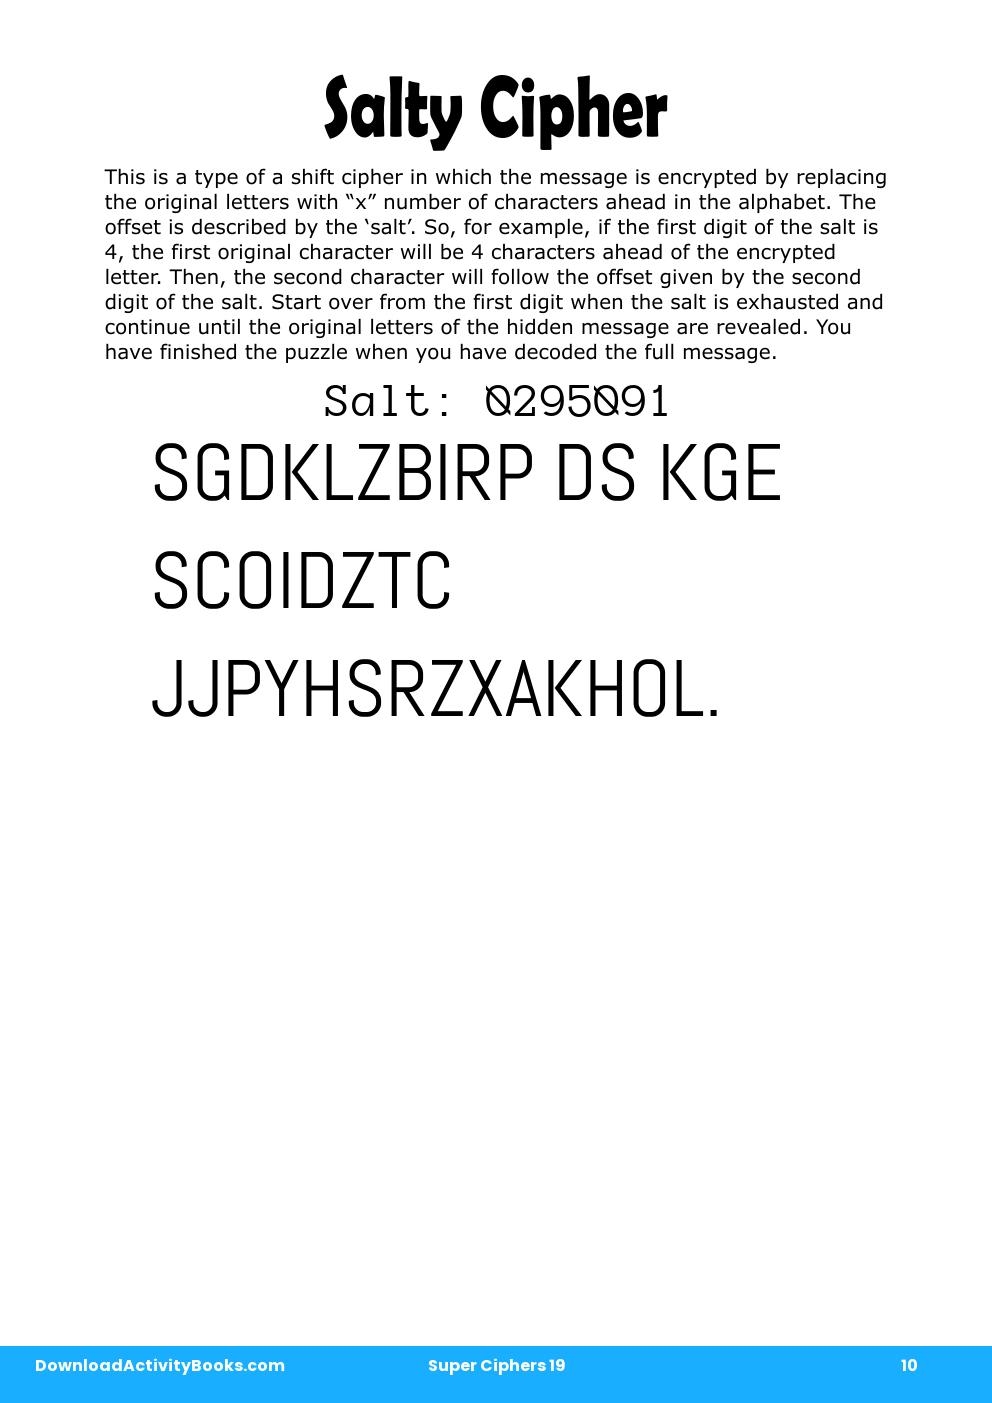 Salty Cipher in Super Ciphers 19